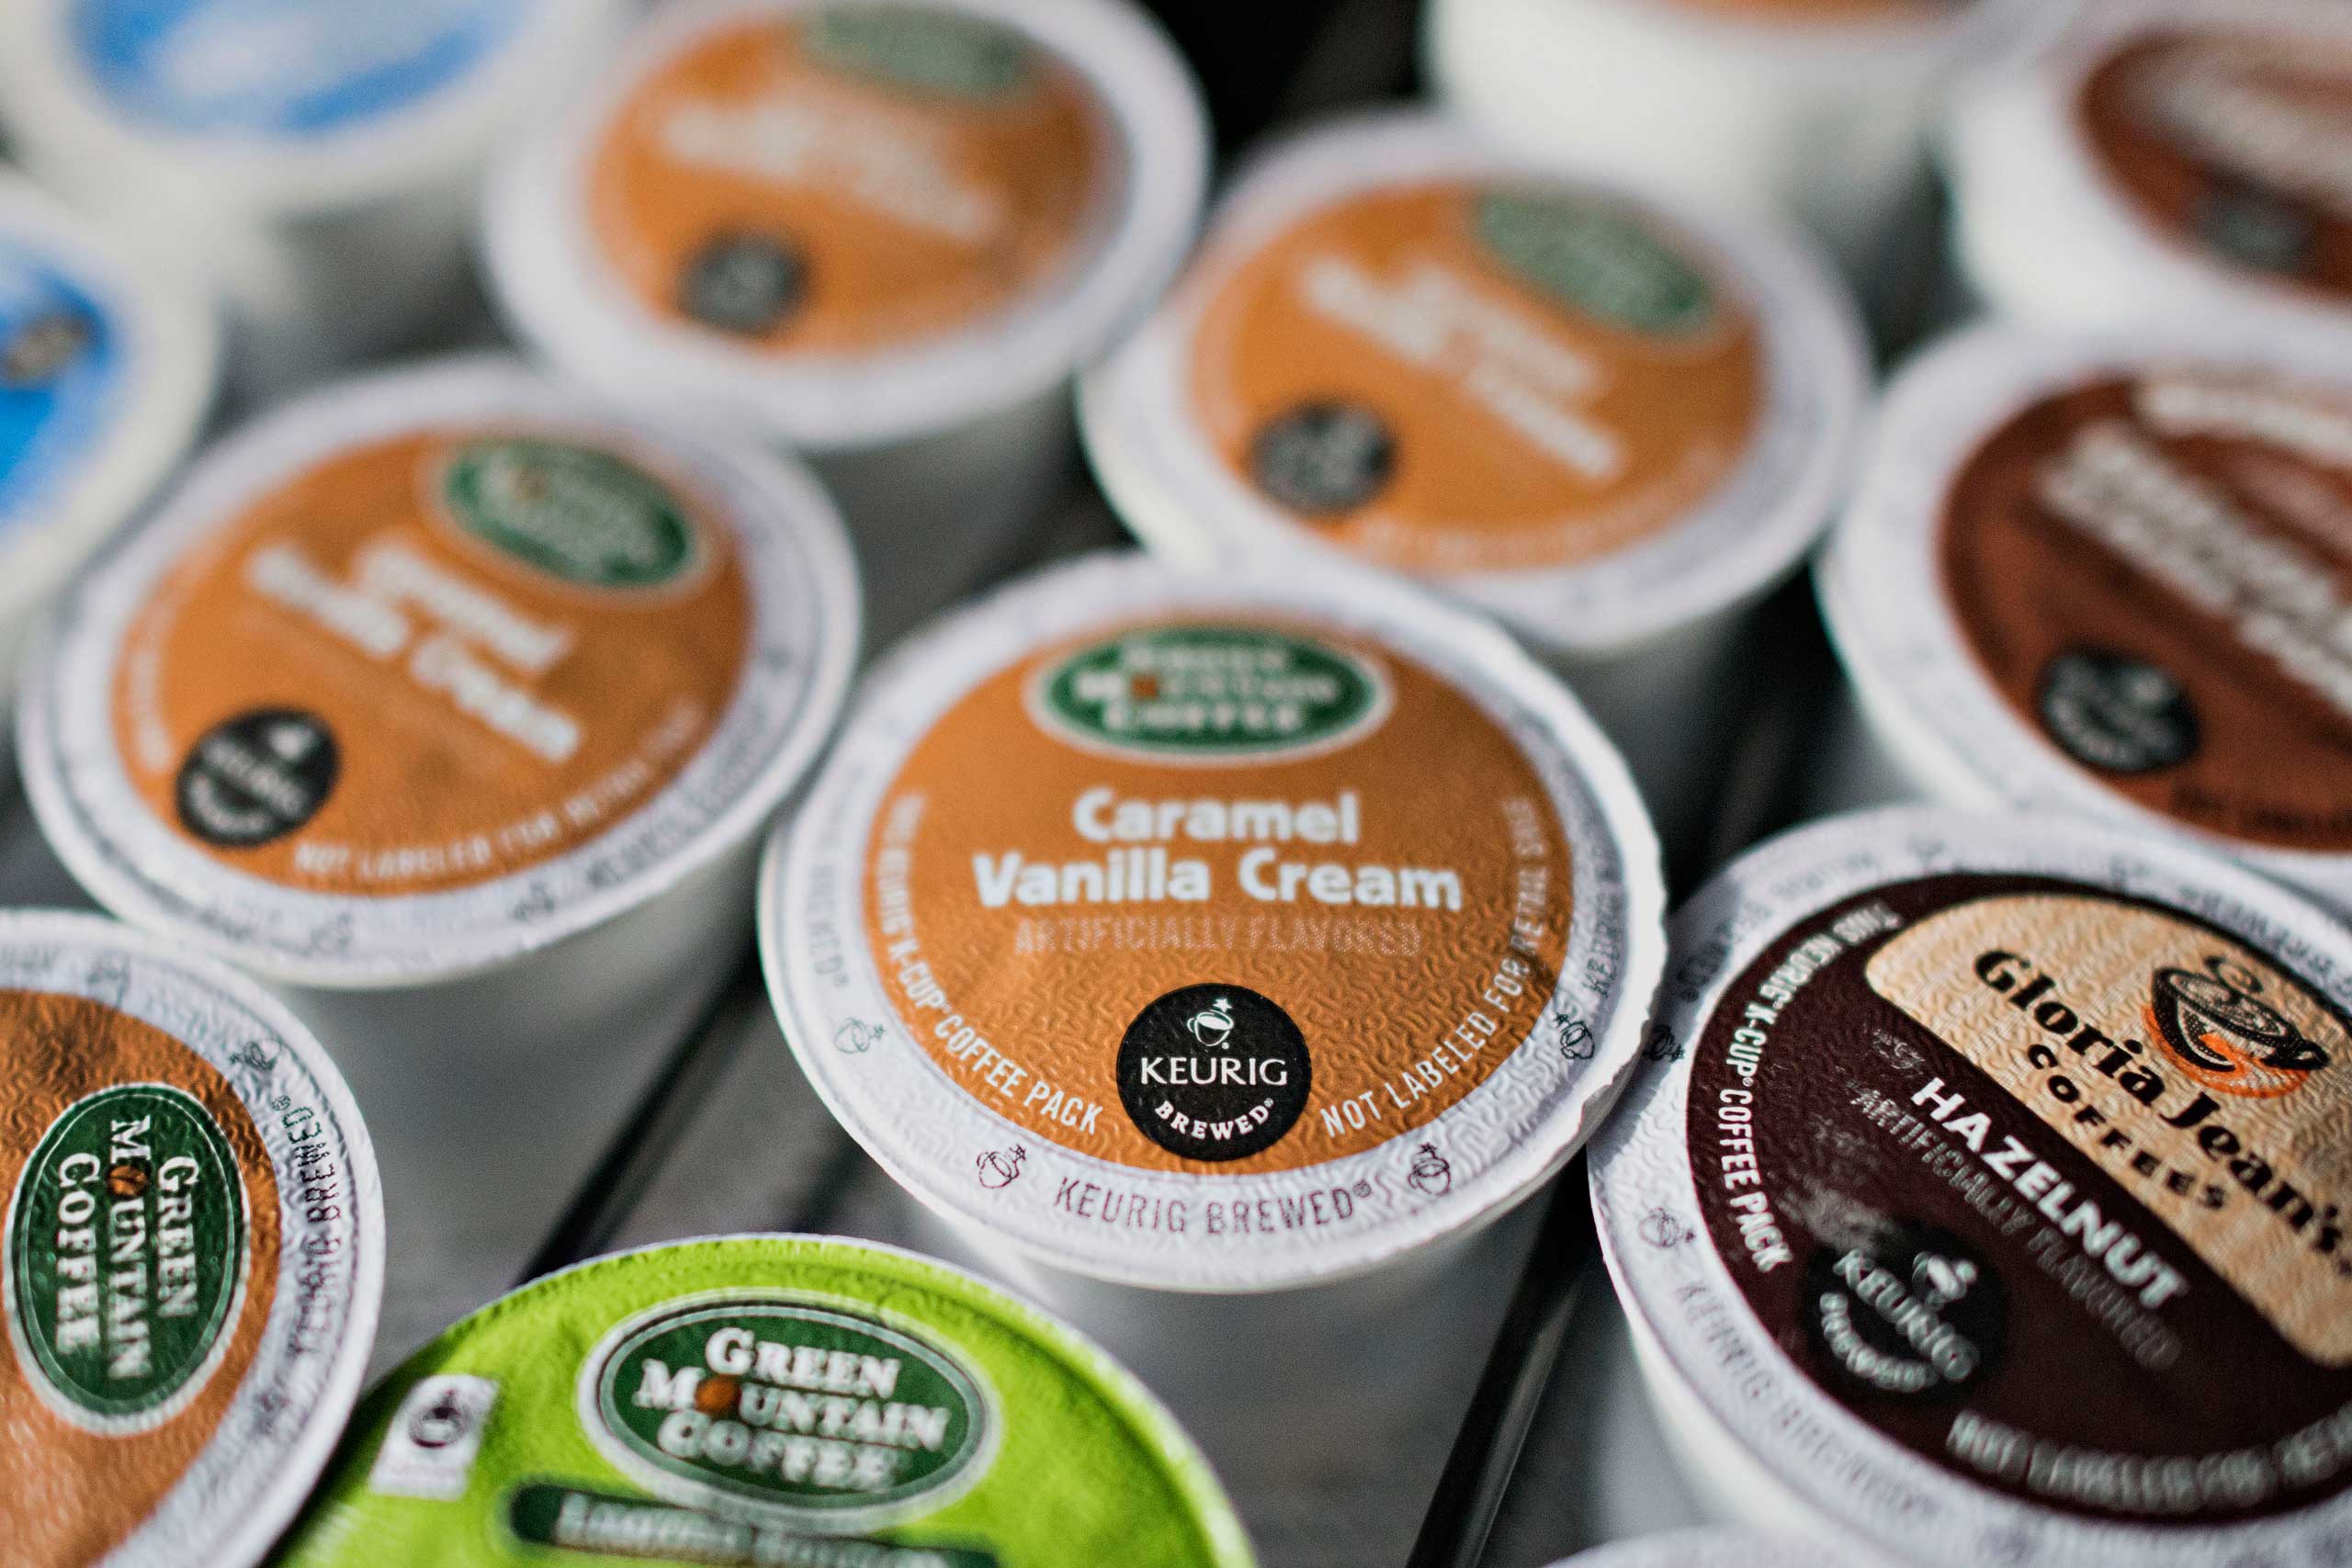 A tray of Keurig Green Mountain Inc. K-Cup coffee packs is arranged for a photograph at a salon in Princeton, Ill., Feb. 3, 2015. (Daniel Acker—Bloomberg/Getty Images)